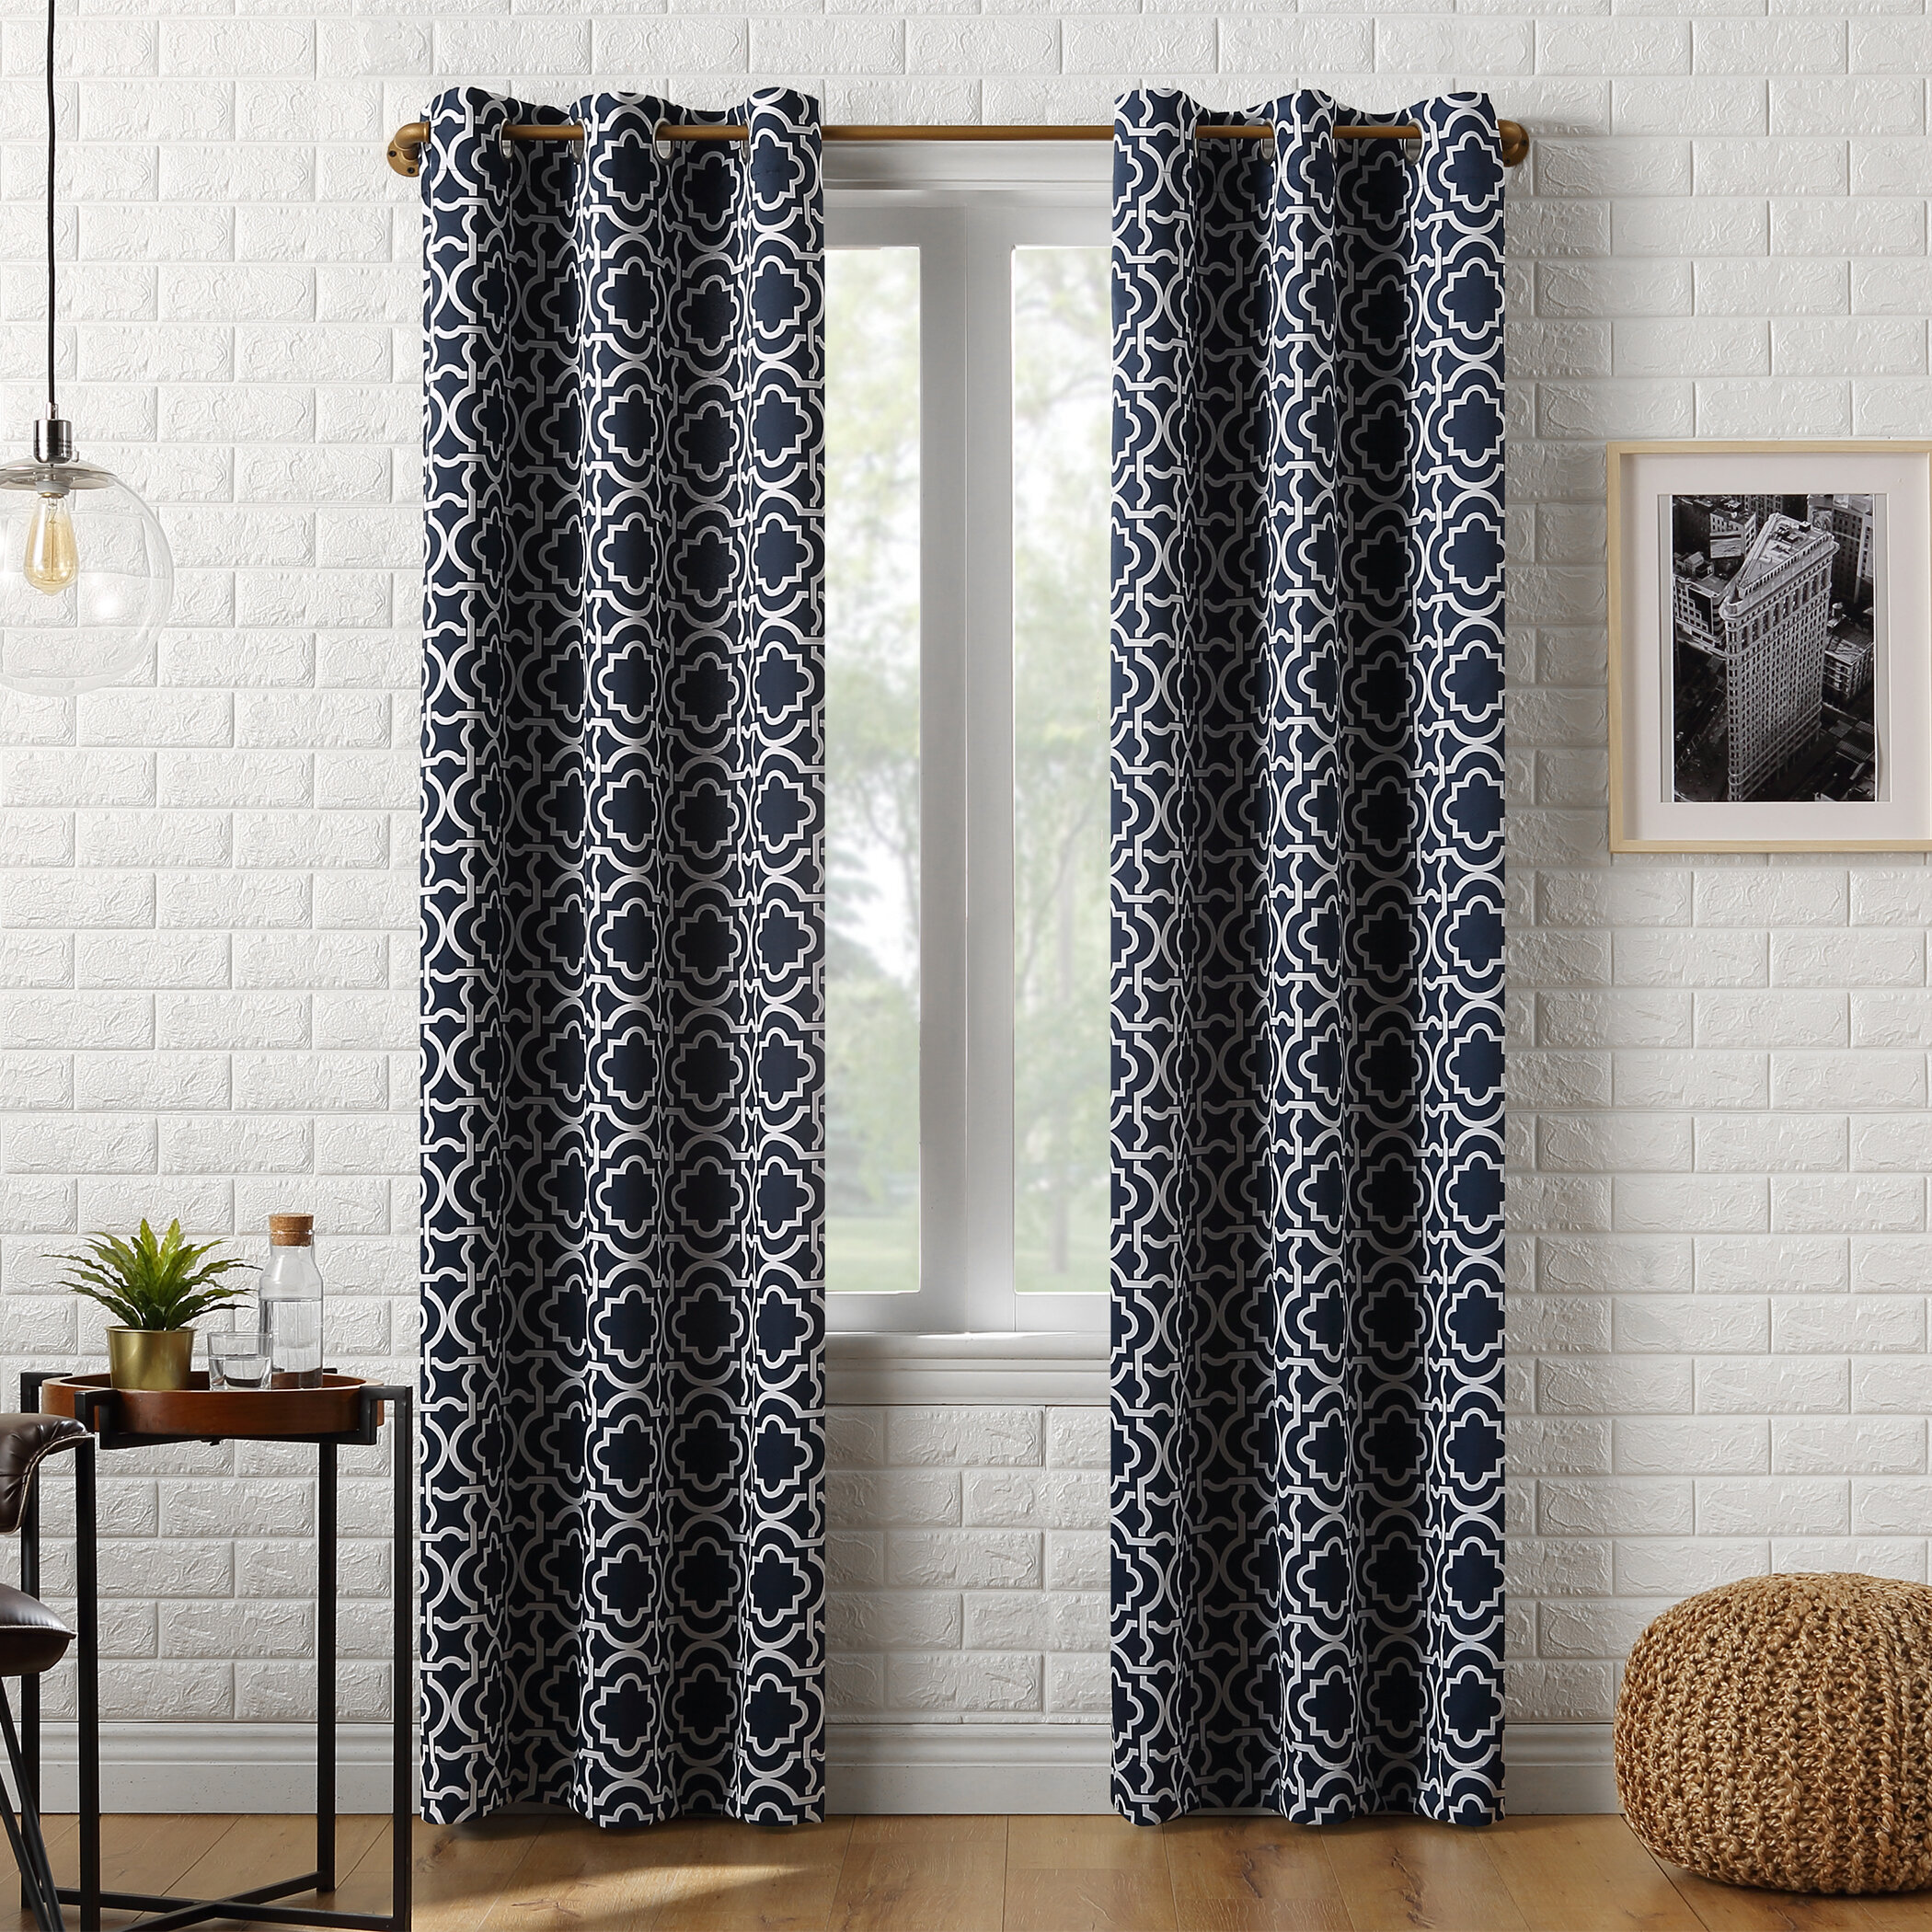 Peel & Stick Curtain/drapery Grommet Covers Easily Change the